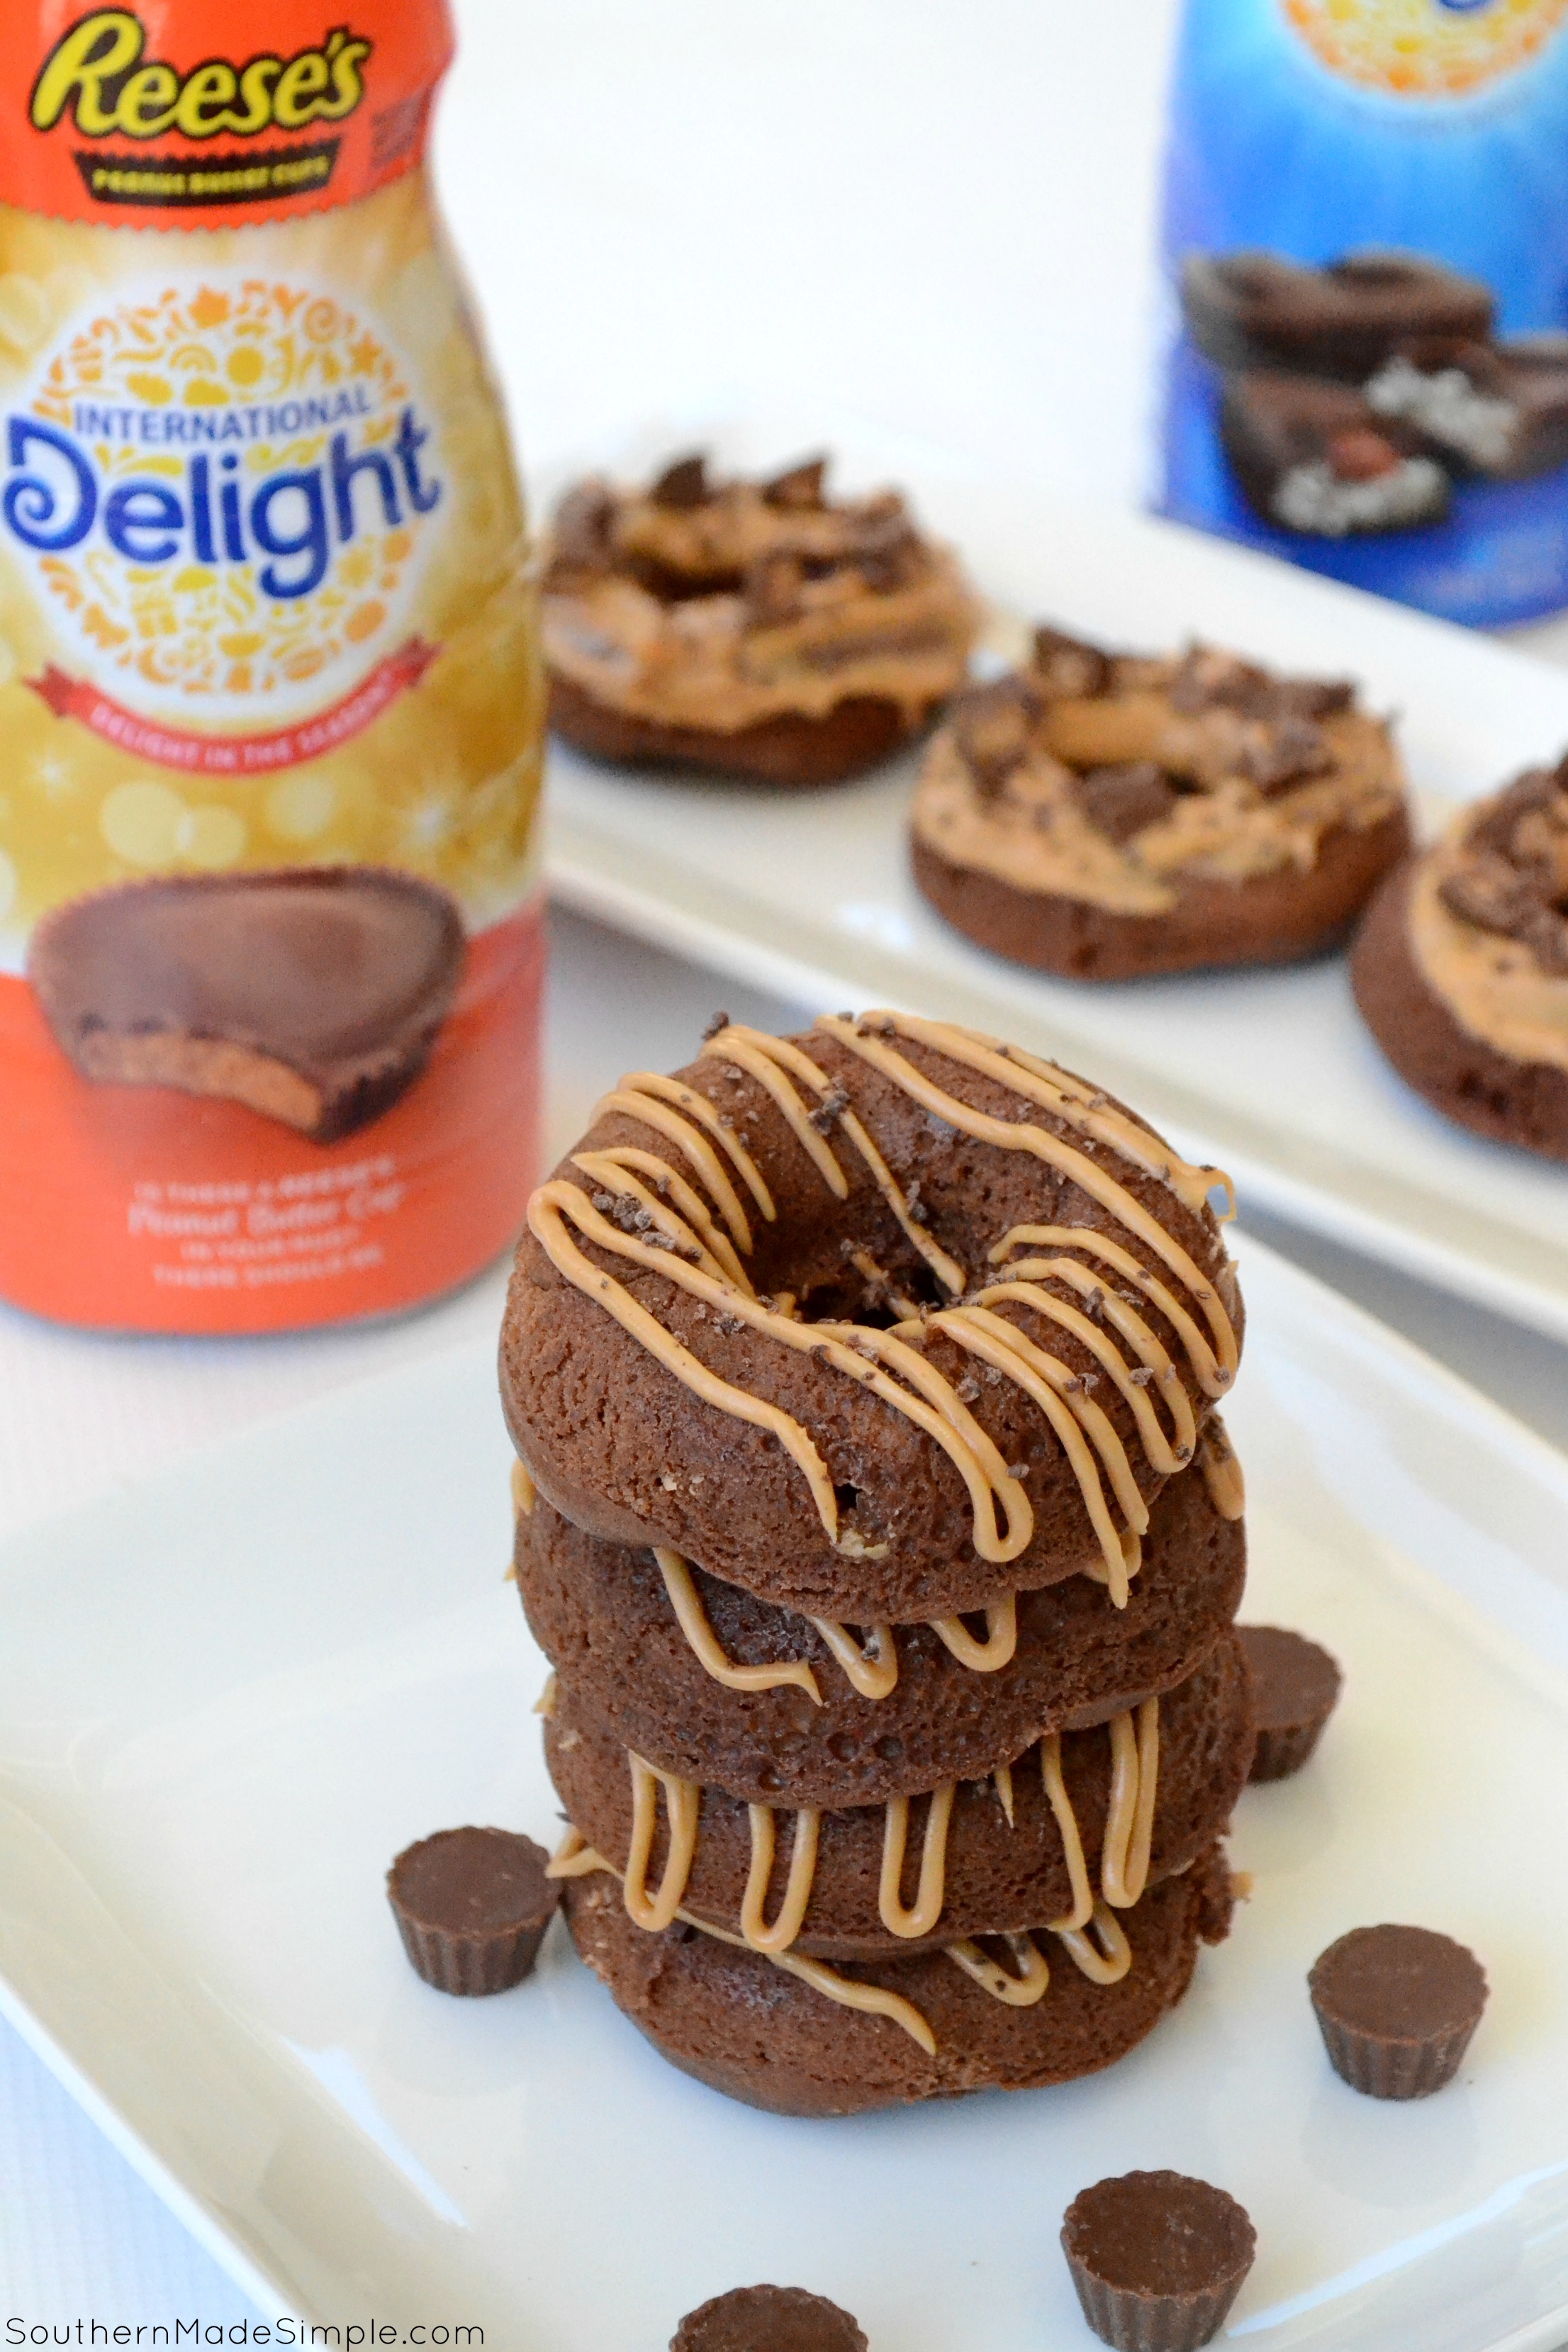 These Glazed Chocolate Peanut Butter Cup Doughnuts are a decadent treat that are easy to make, and they're perfect paired with your morning cup of coffee! #ad #DelightfulMoments #SplashOfDelight